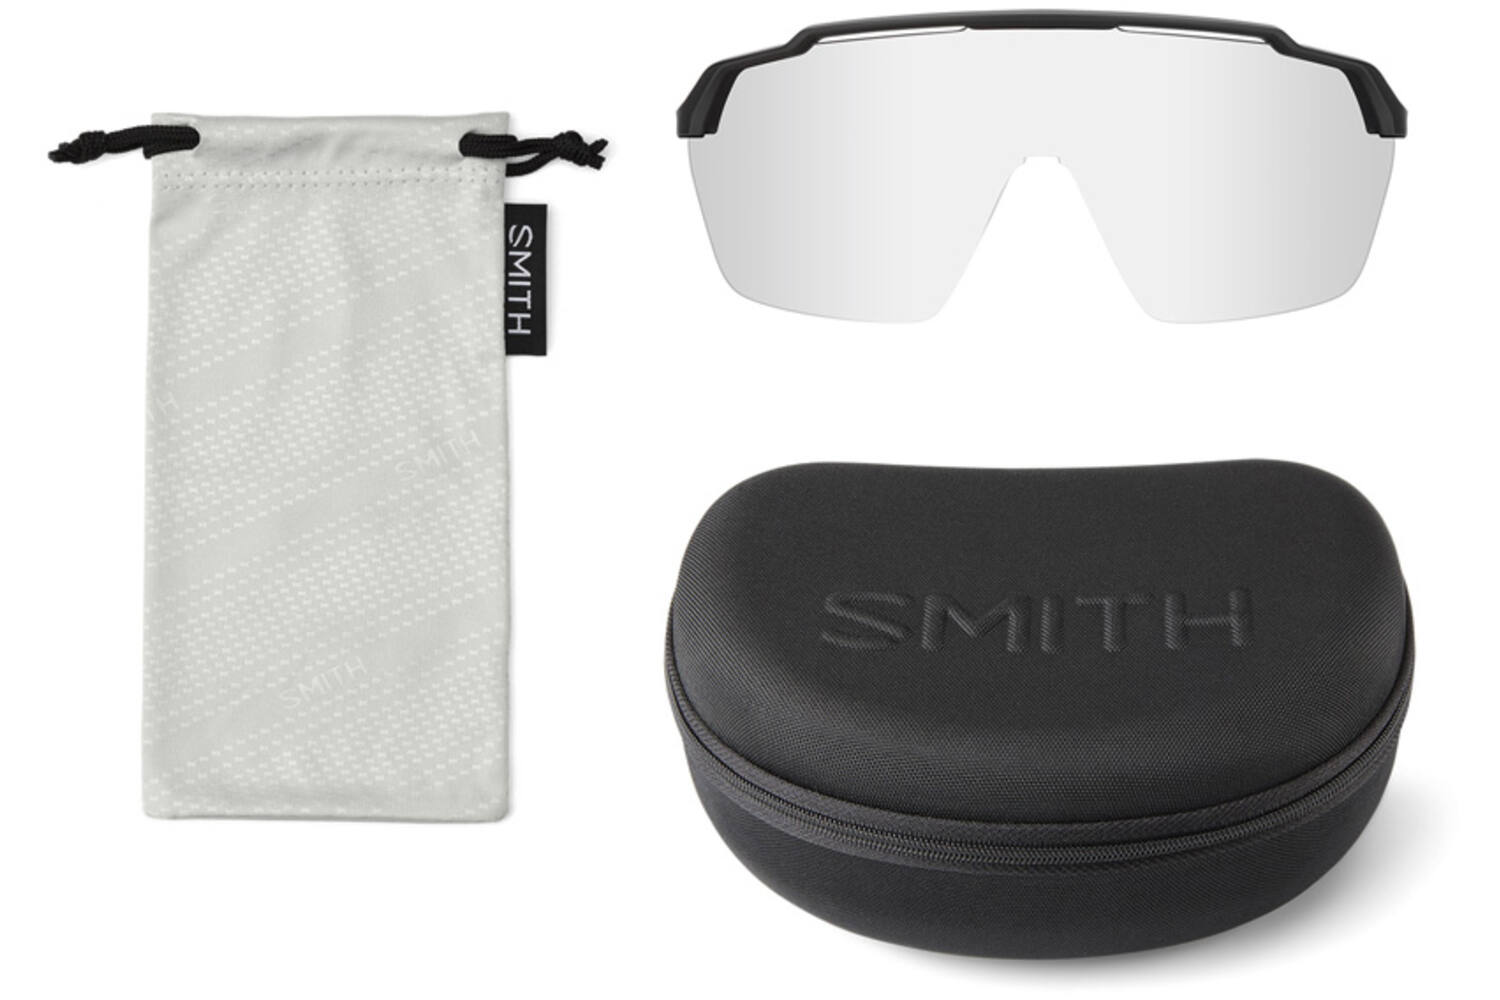 Smith - Shift XL mag glasses BLACK PHOTOCHROMIC CLEAR TO GREY